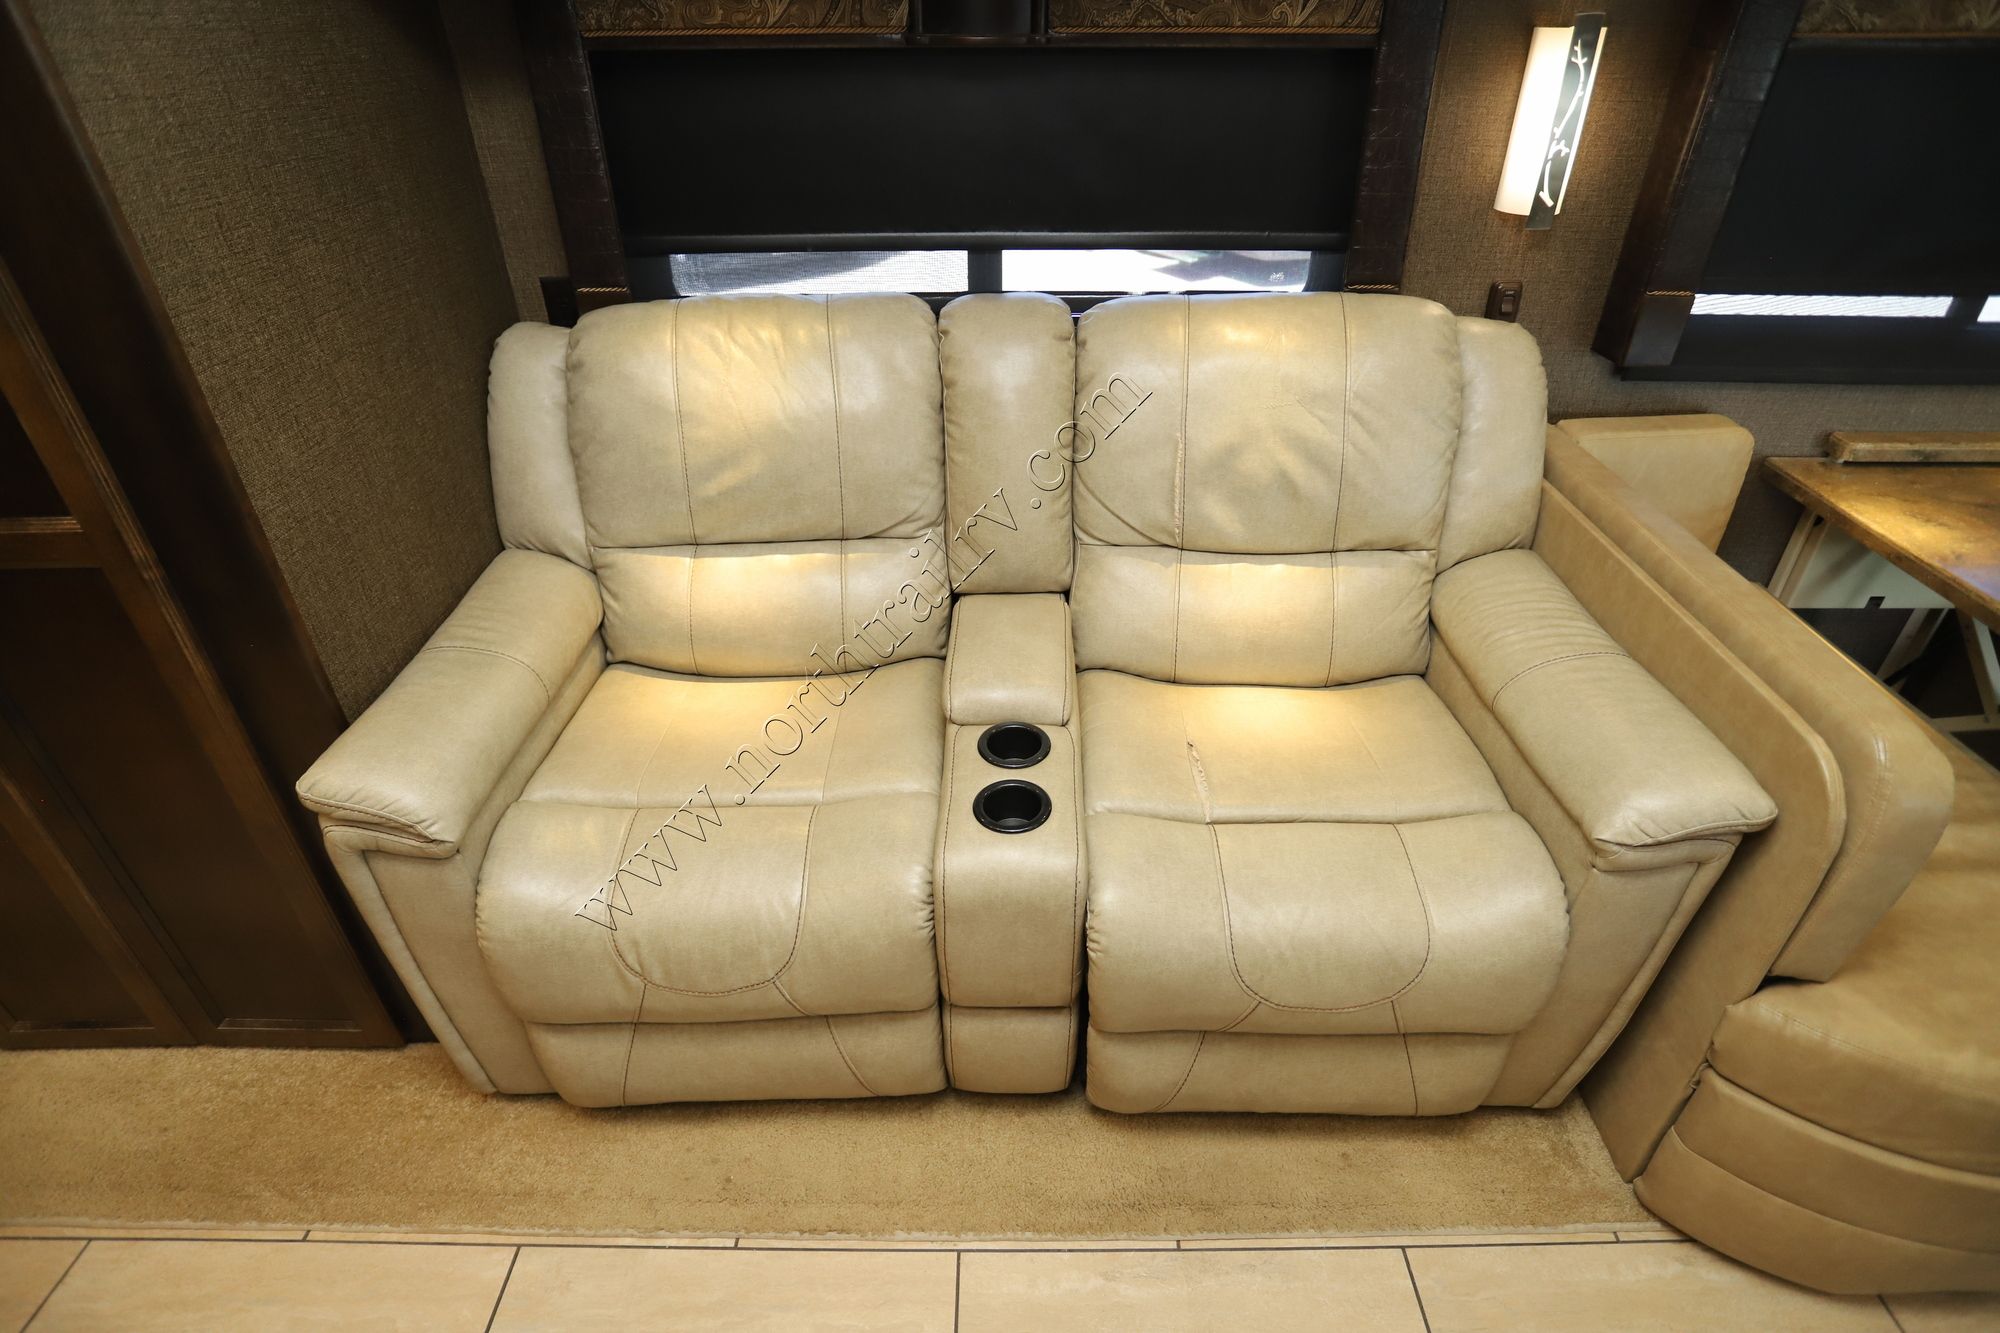 Used 2016 Tiffin Motor Homes Allegro 36UA Class A  For Sale